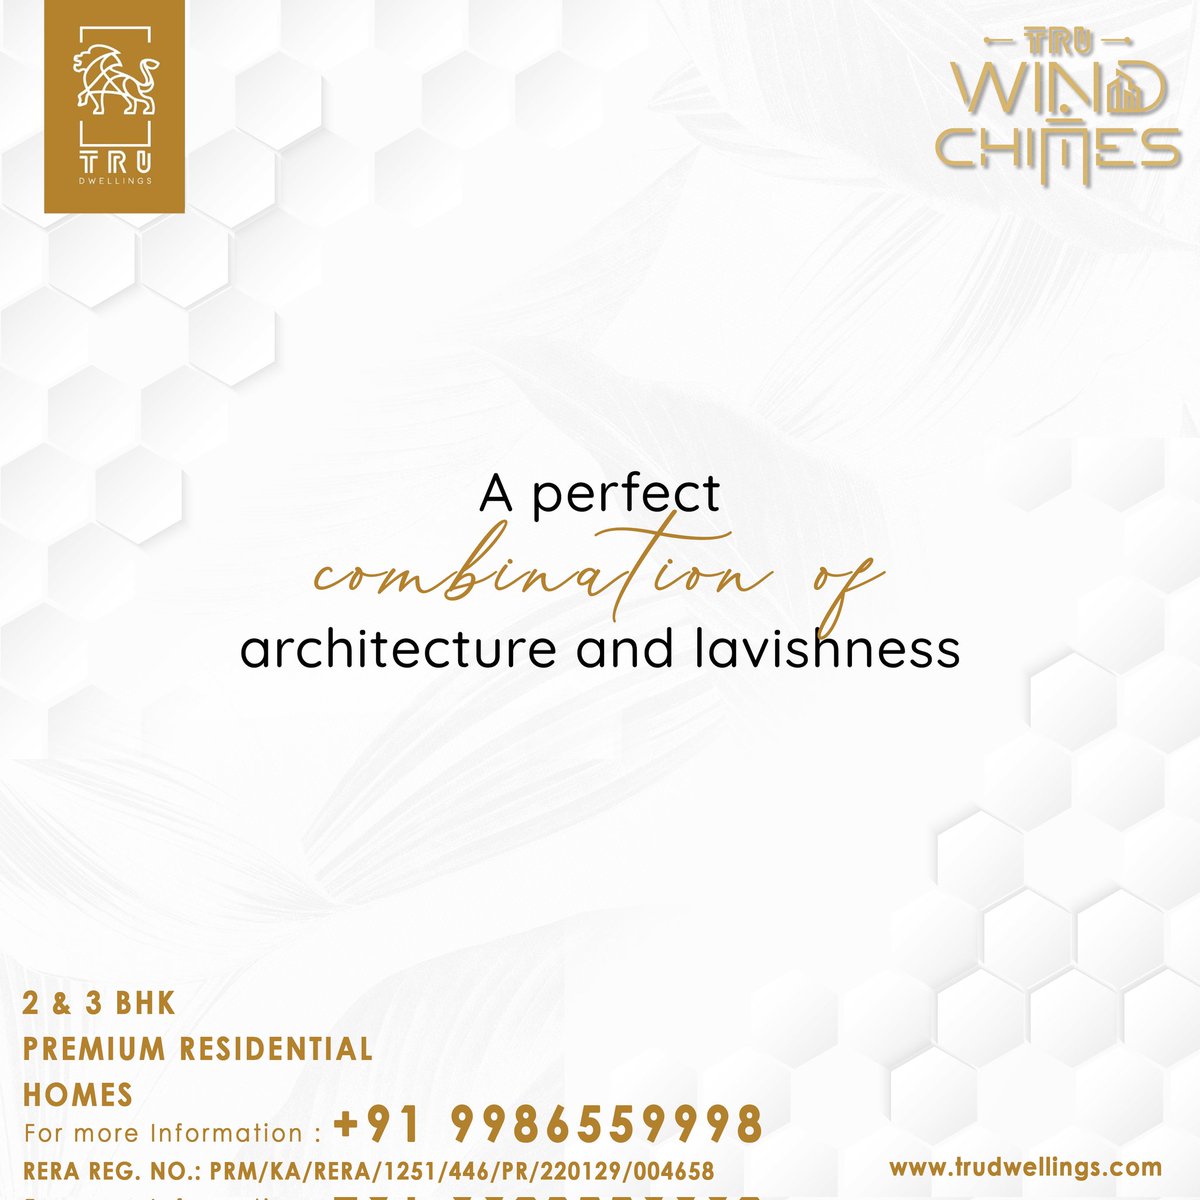 The best of architecture and opulence amalgamated for your most beautiful homes! 
.
.
.
.
#Trudwellings #LuxuryRealEstate #ModernArchitecture #ElegantHomes #HighEndHomes #LuxuryHomes #PrestigiousProperties #LavishLiving #ExquisiteInteriors #ArchitecturalExcellence